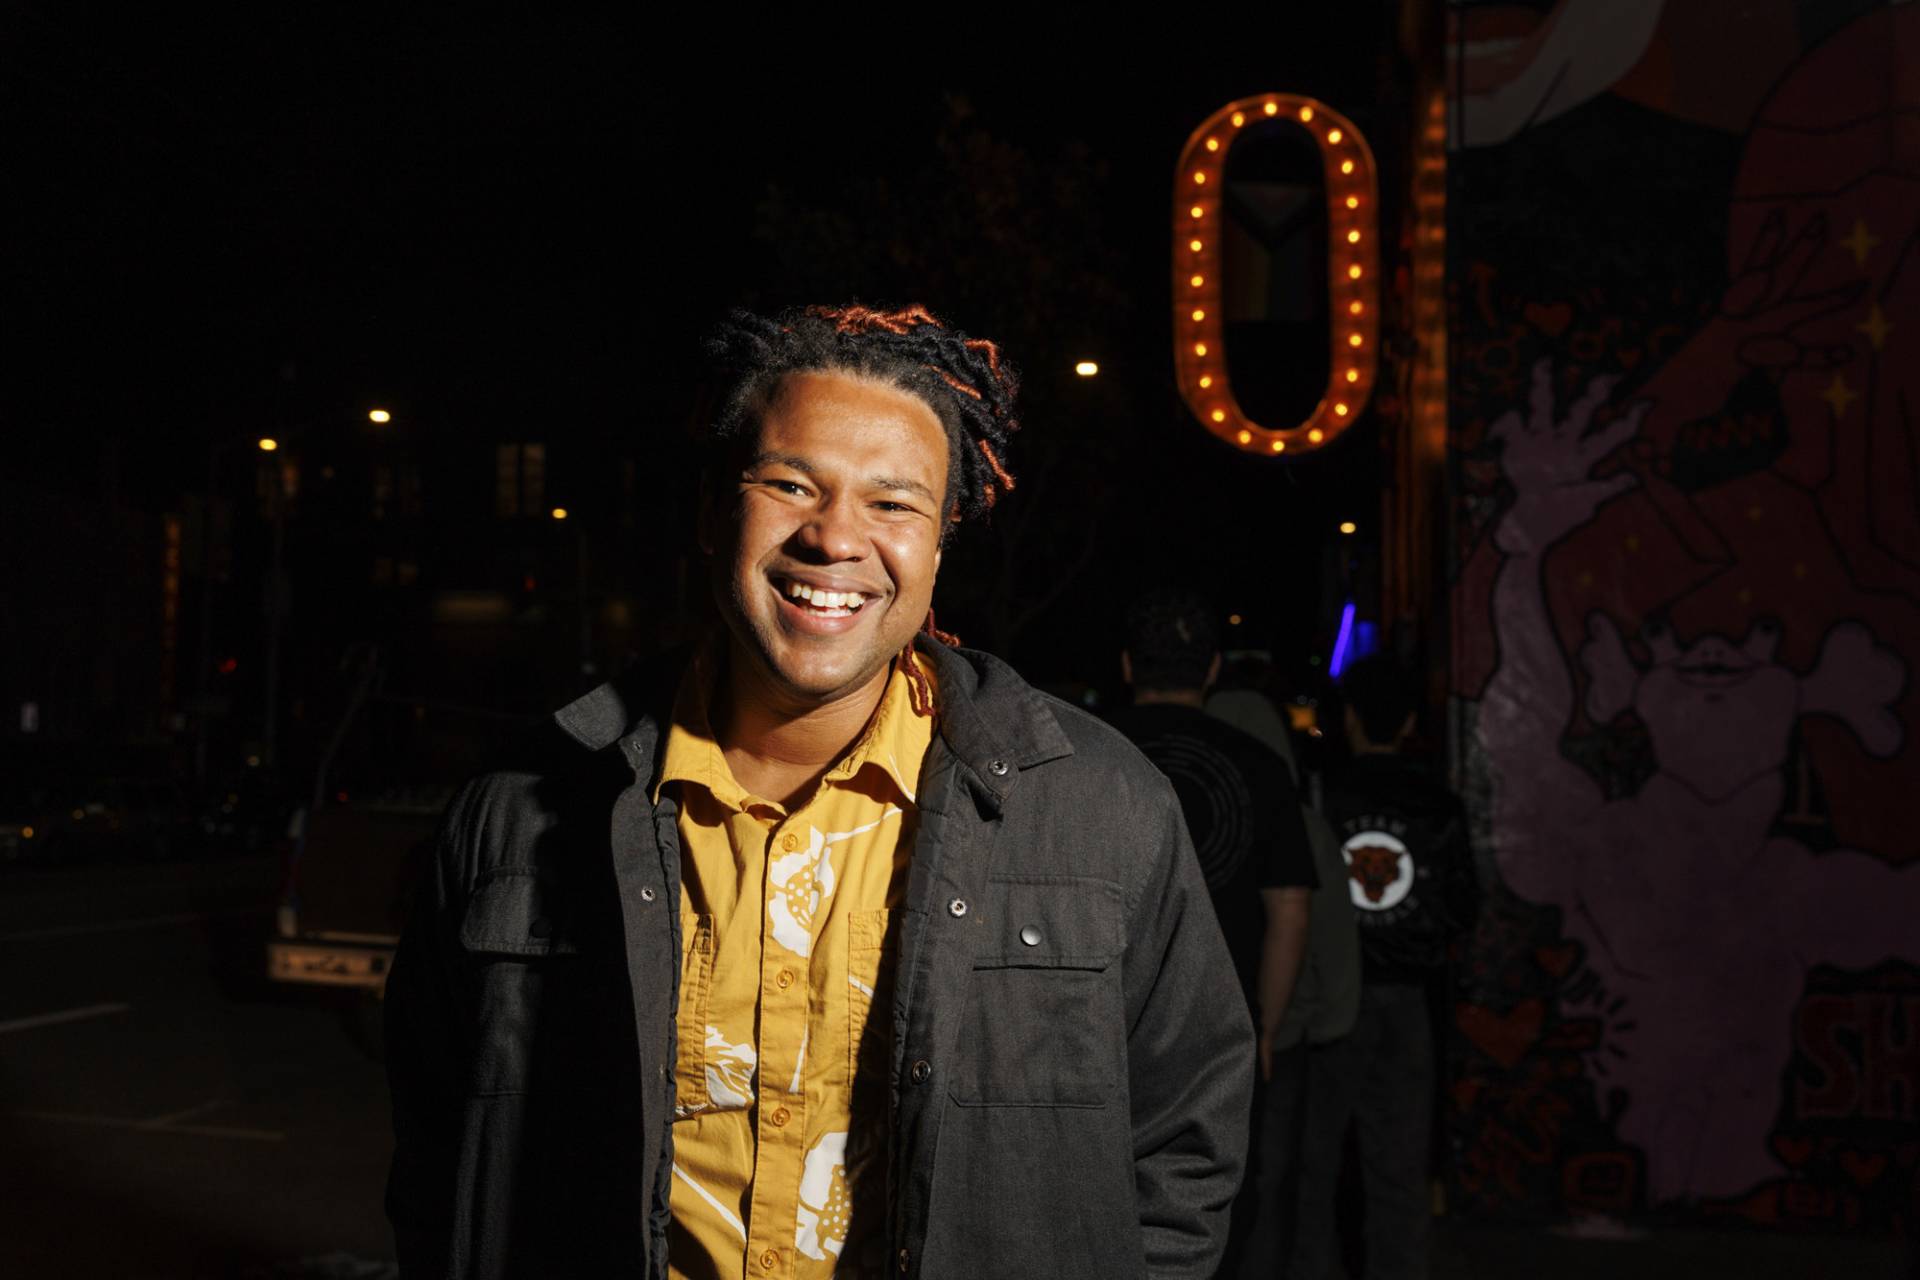 A Black man smiles broadly in front of a neon-lit O sign at night.